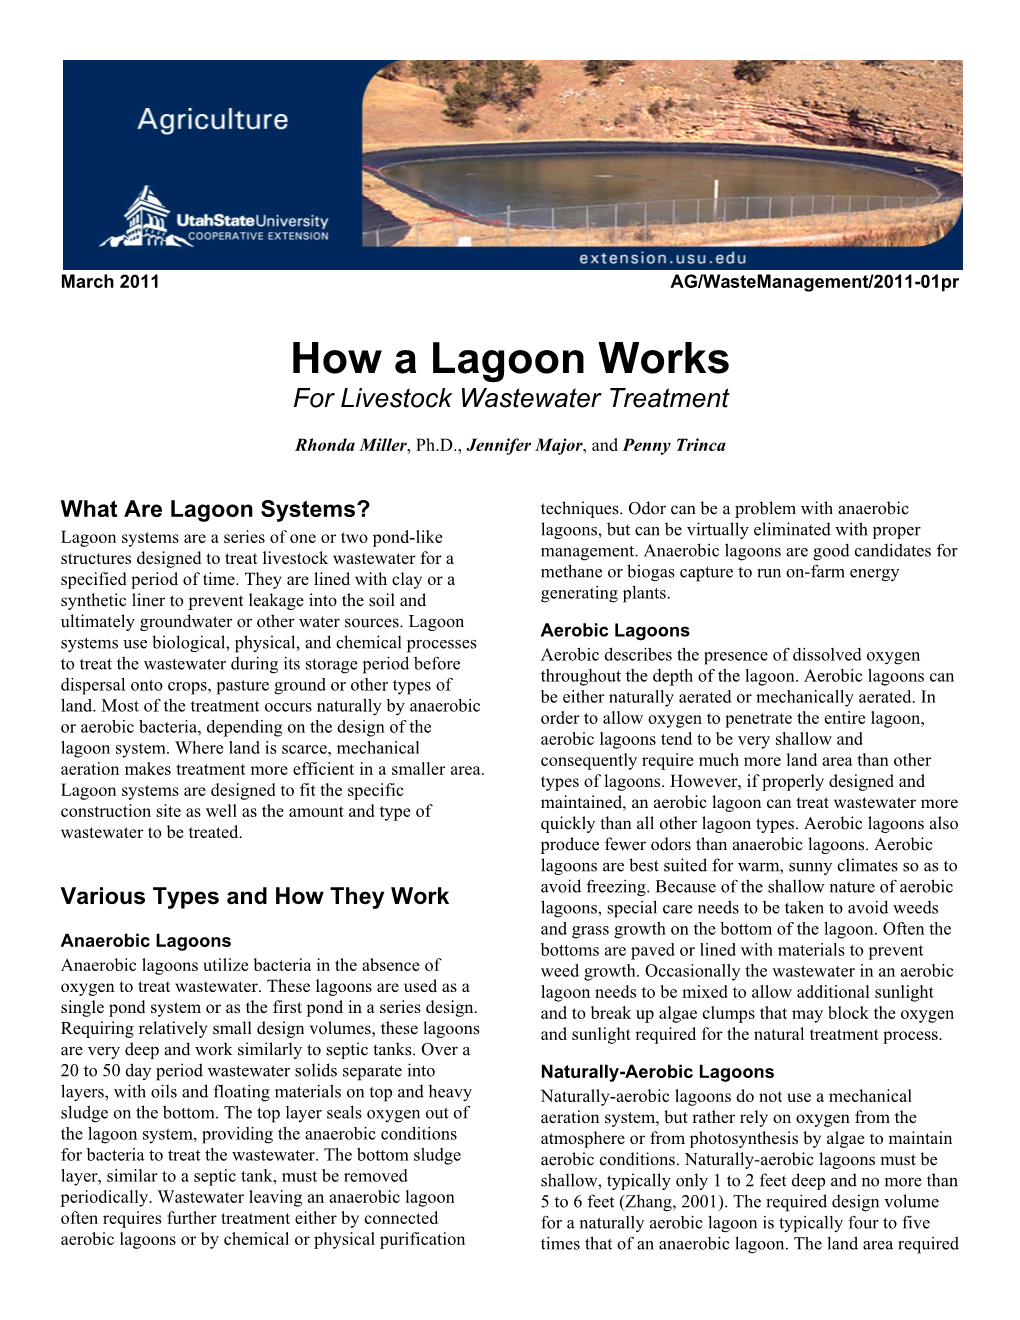 How a Lagoon Works for Livestock Wastewater Treatment